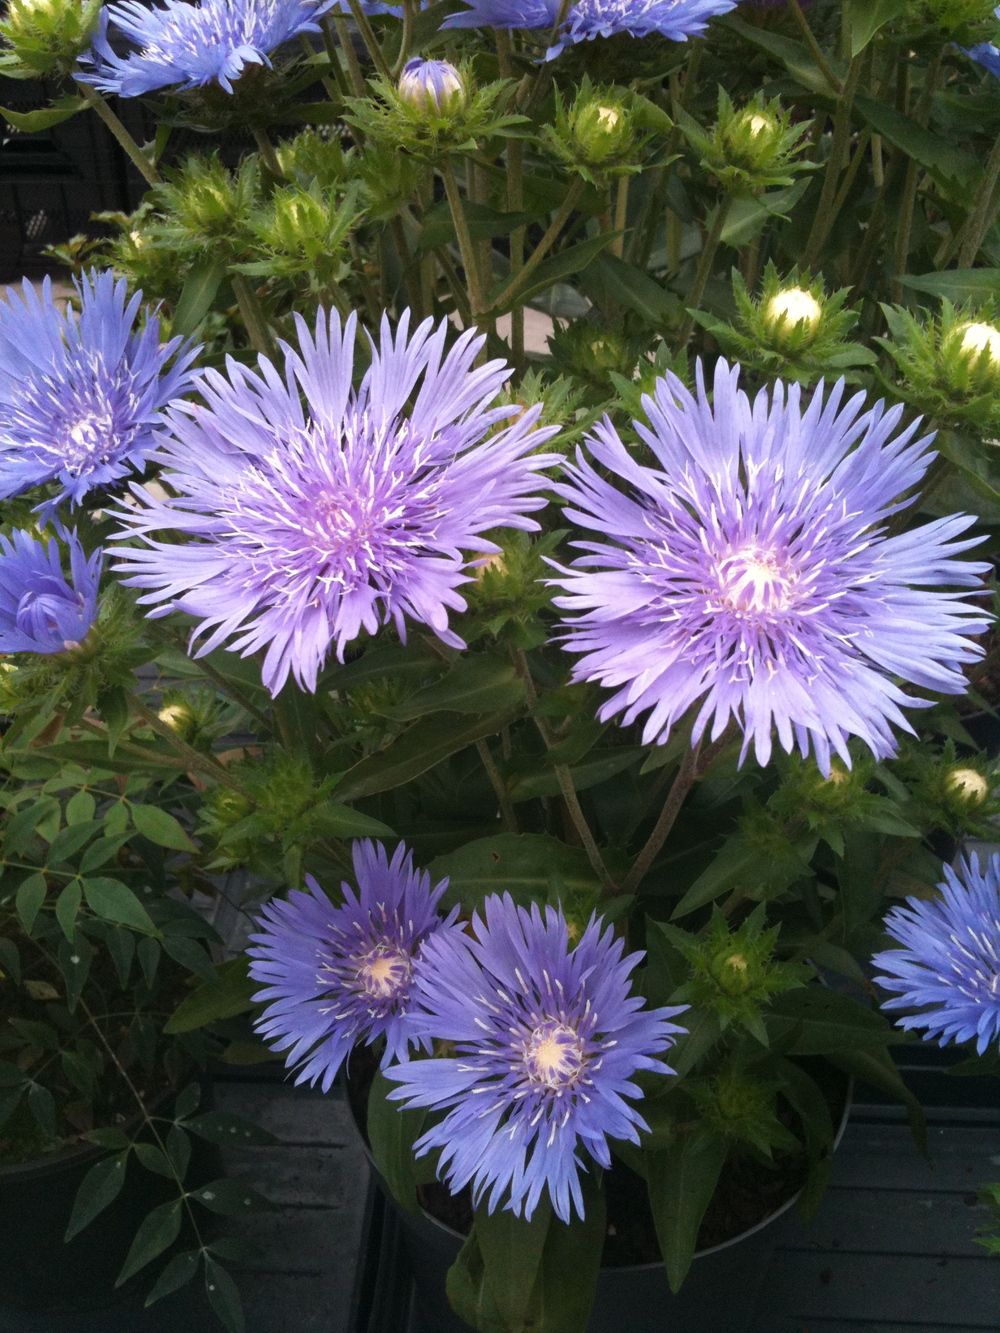 images/plants/stokesia/sto-mels-blue/sto-mels-blue-0008.jpg